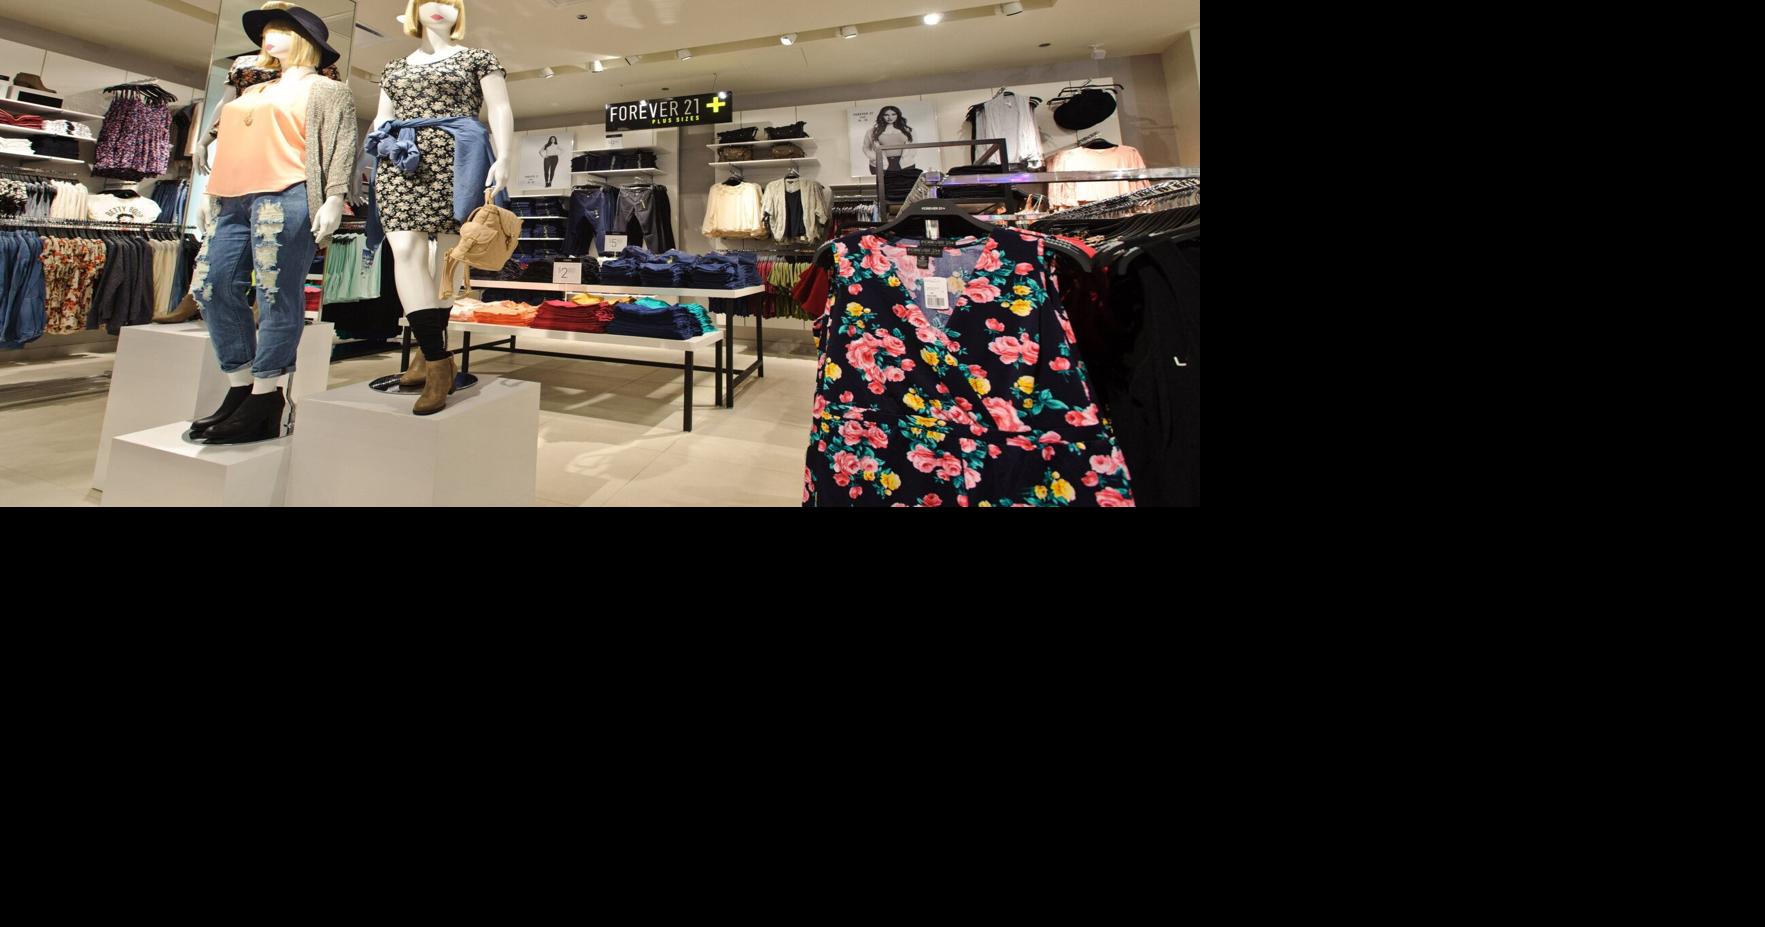 Forever 21 could close stores in this Florida city due to